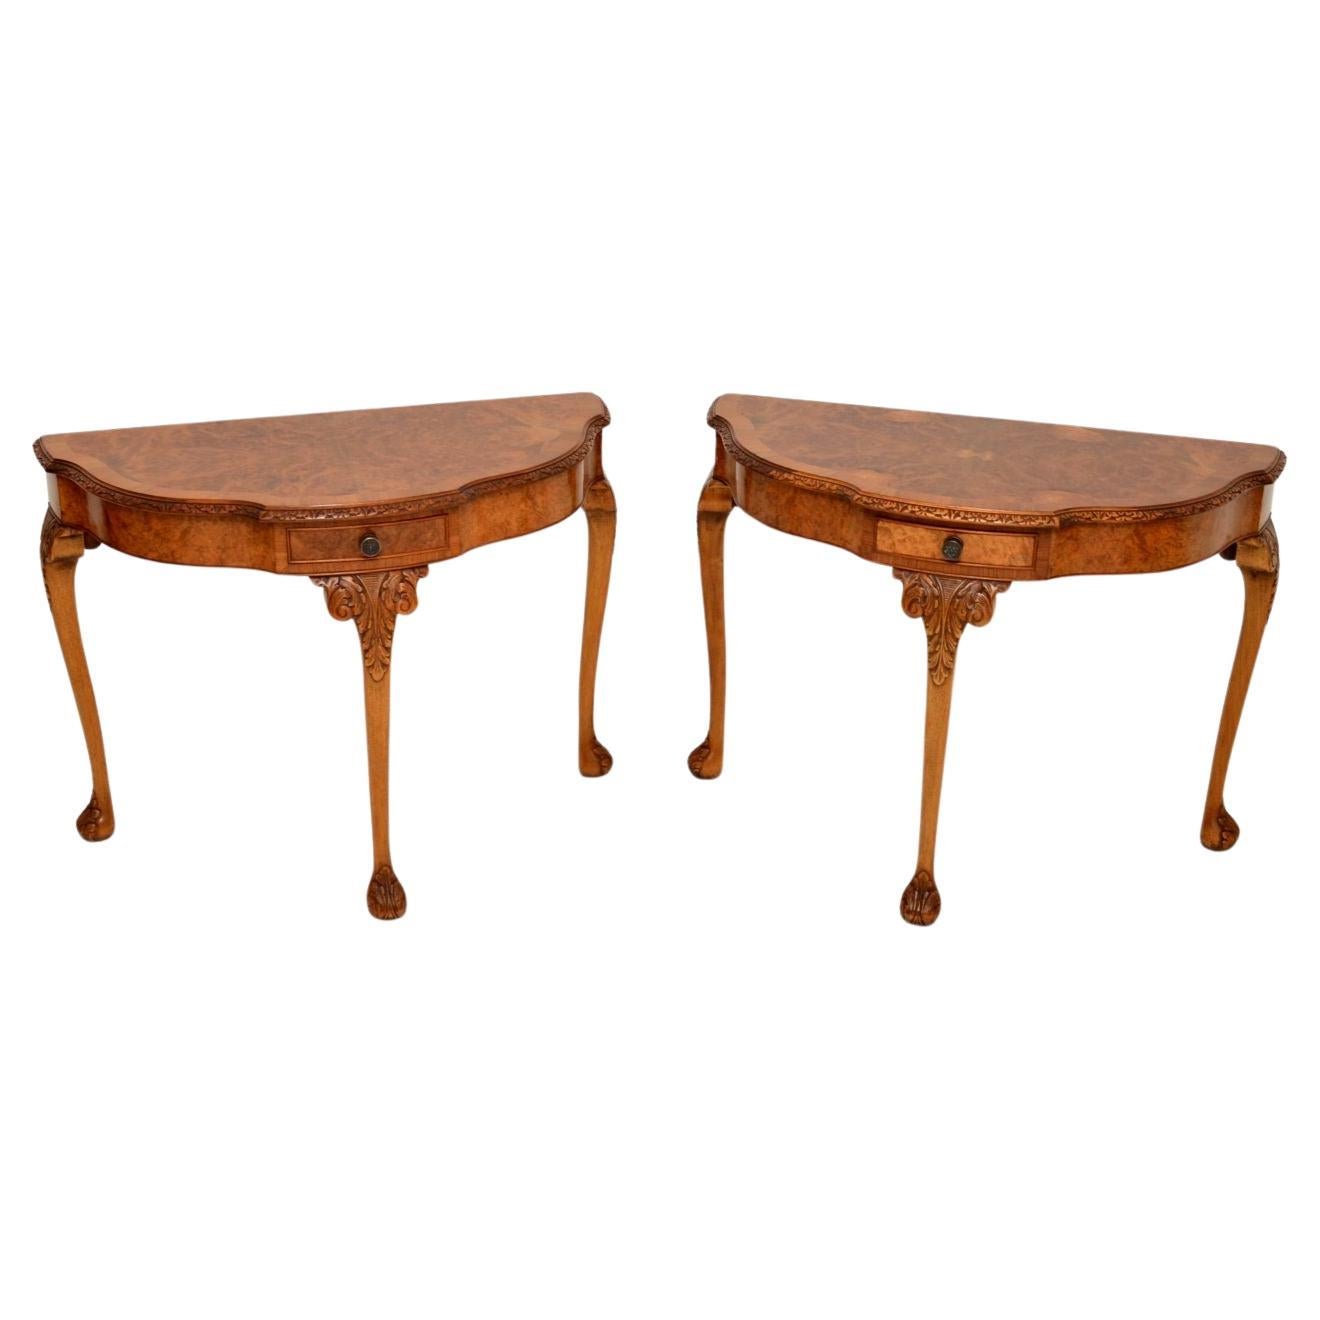 Pair of Antique Queen Anne Style Burr Walnut Console Tables For Sale